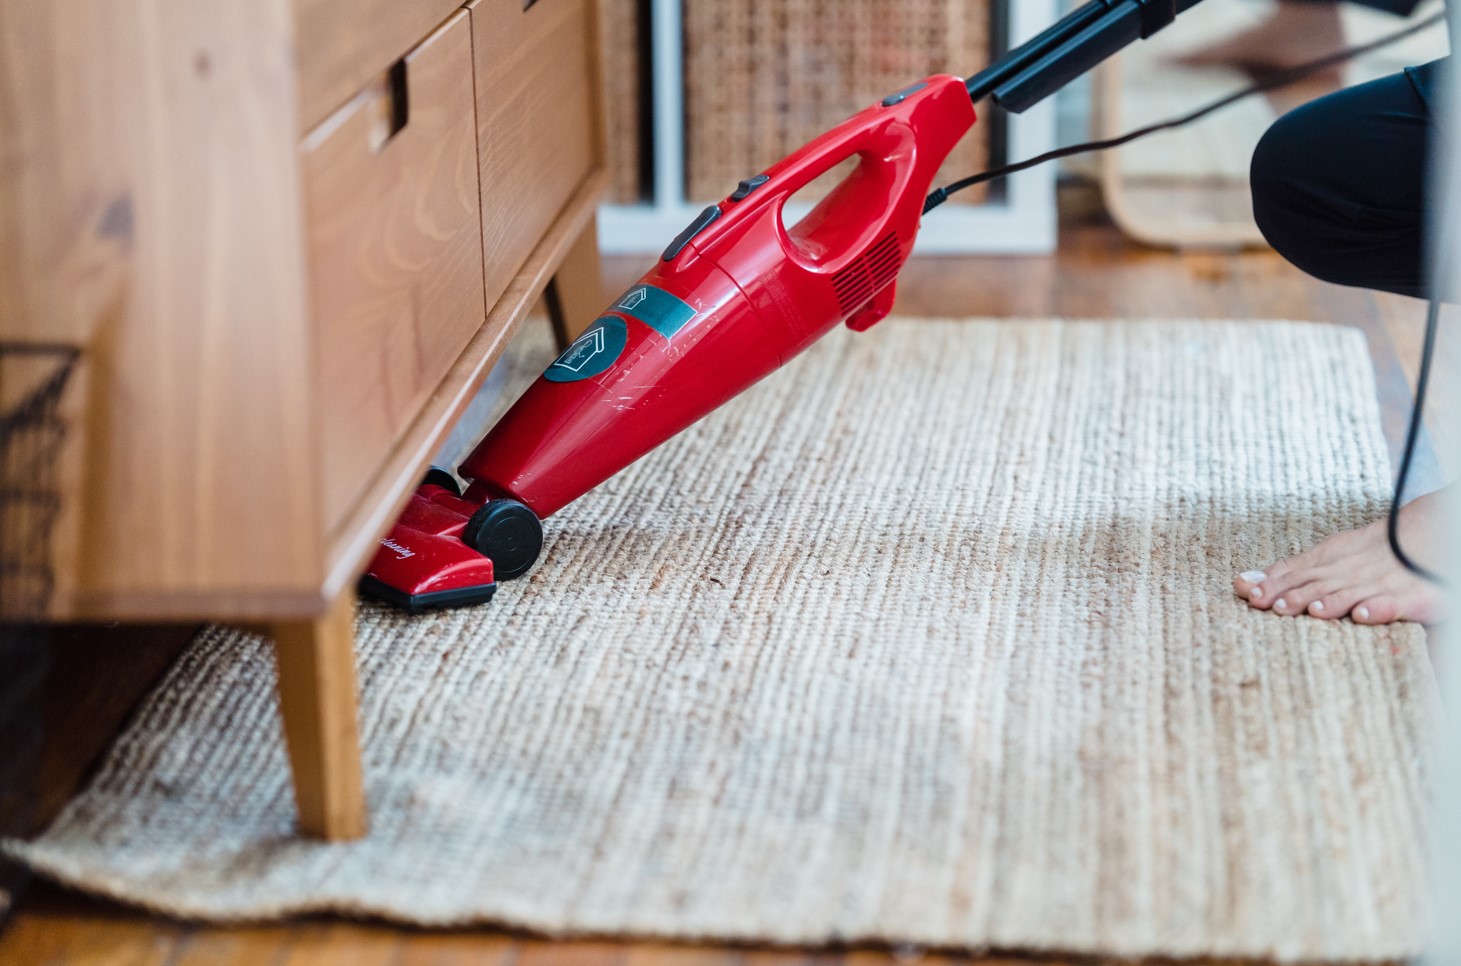 How To Get Bad Smell Out Of Vacuum Cleaner